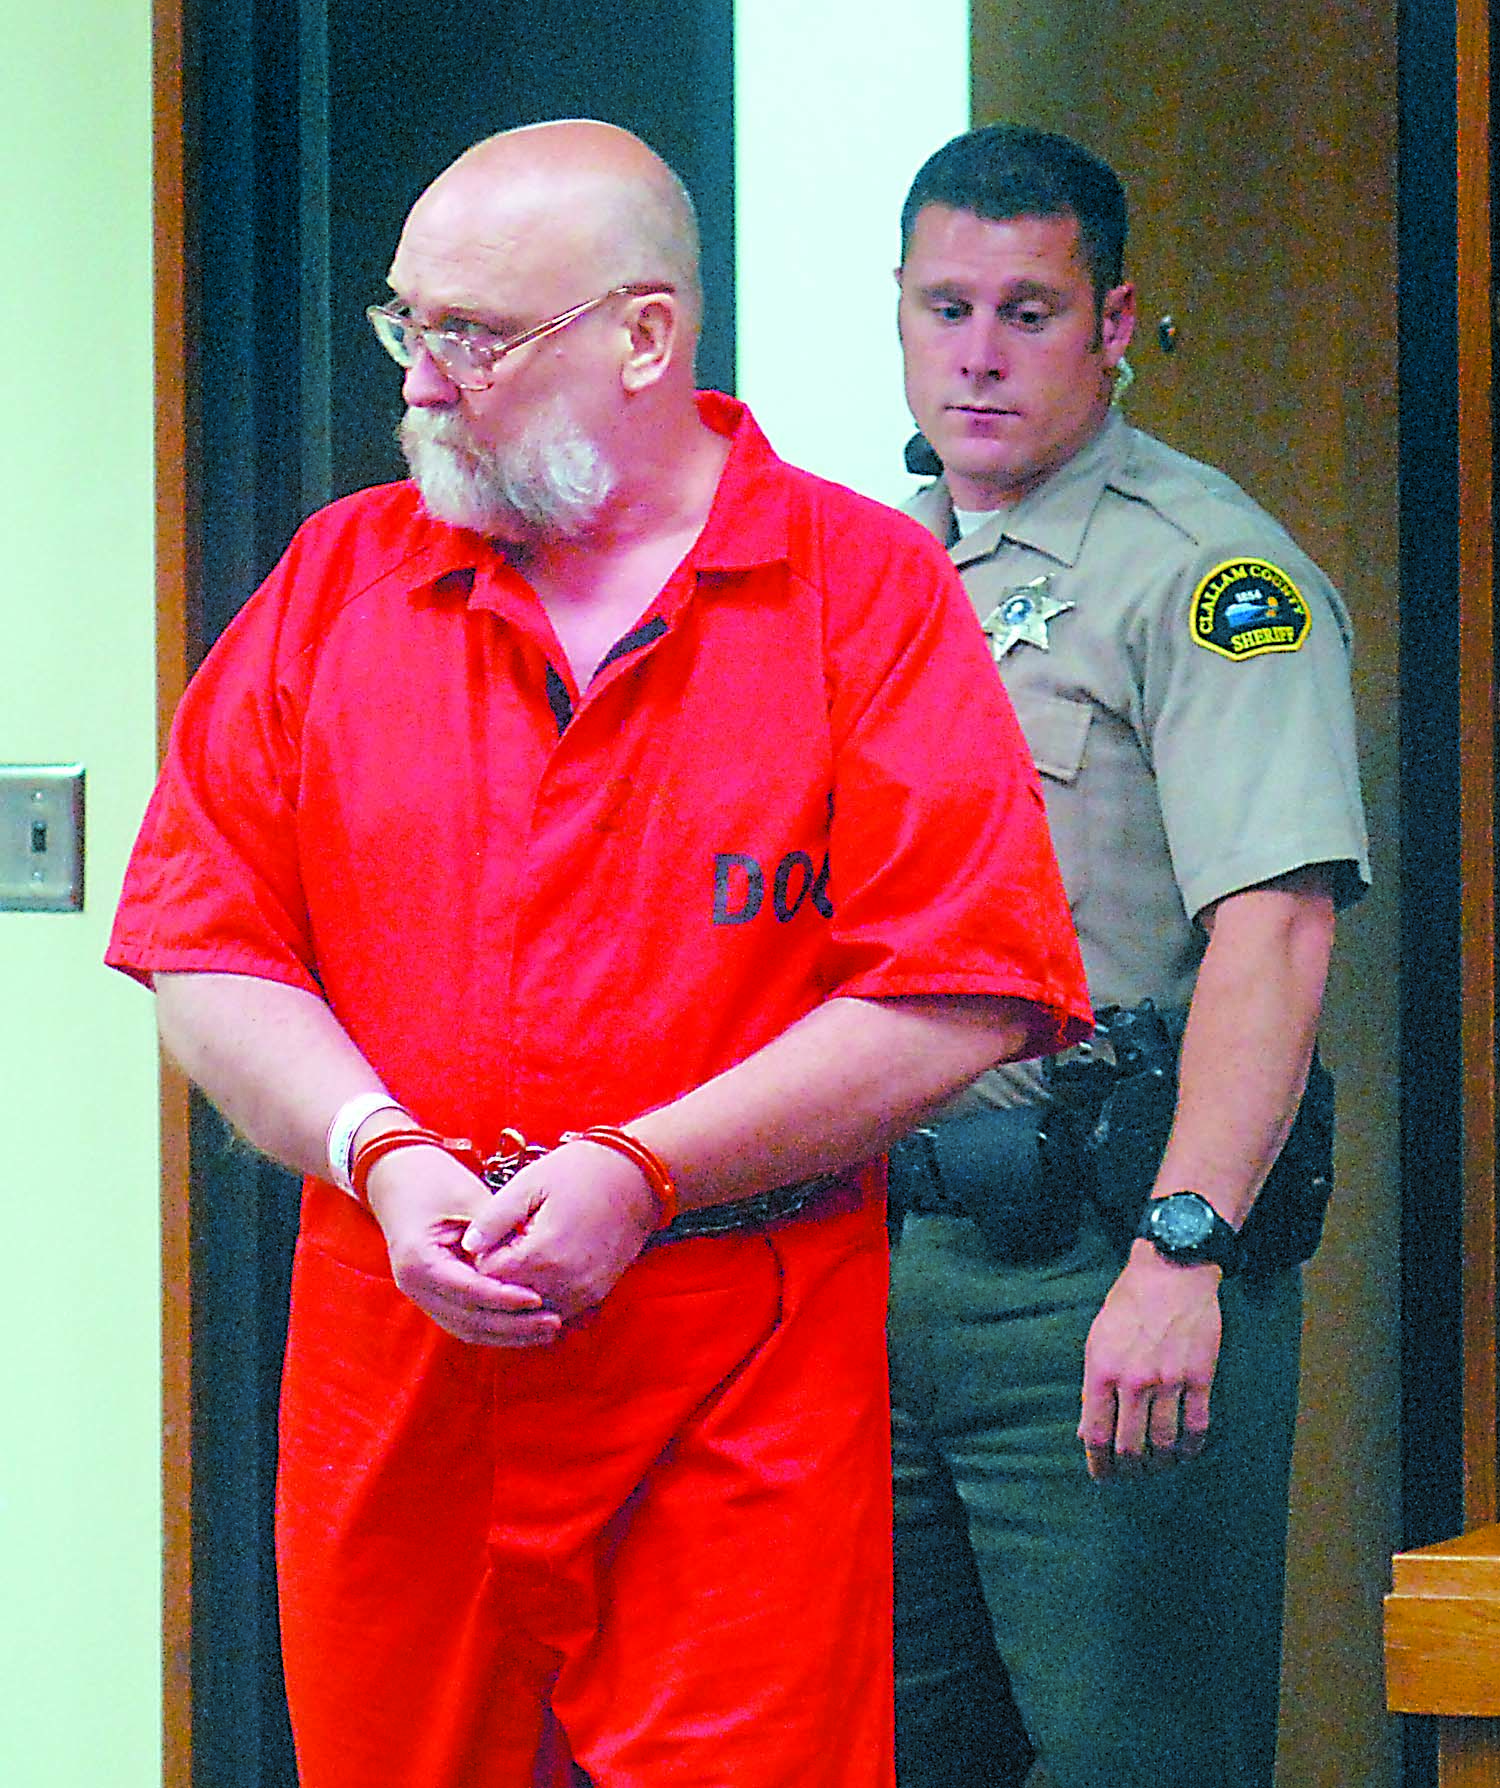 Darold Stenson enters Clallam County Superior Court for a status hearing on Friday accompanied by court sercurity officer Eric Morris.  -- Photo by Keith Thorpe/Peninsula Daily News